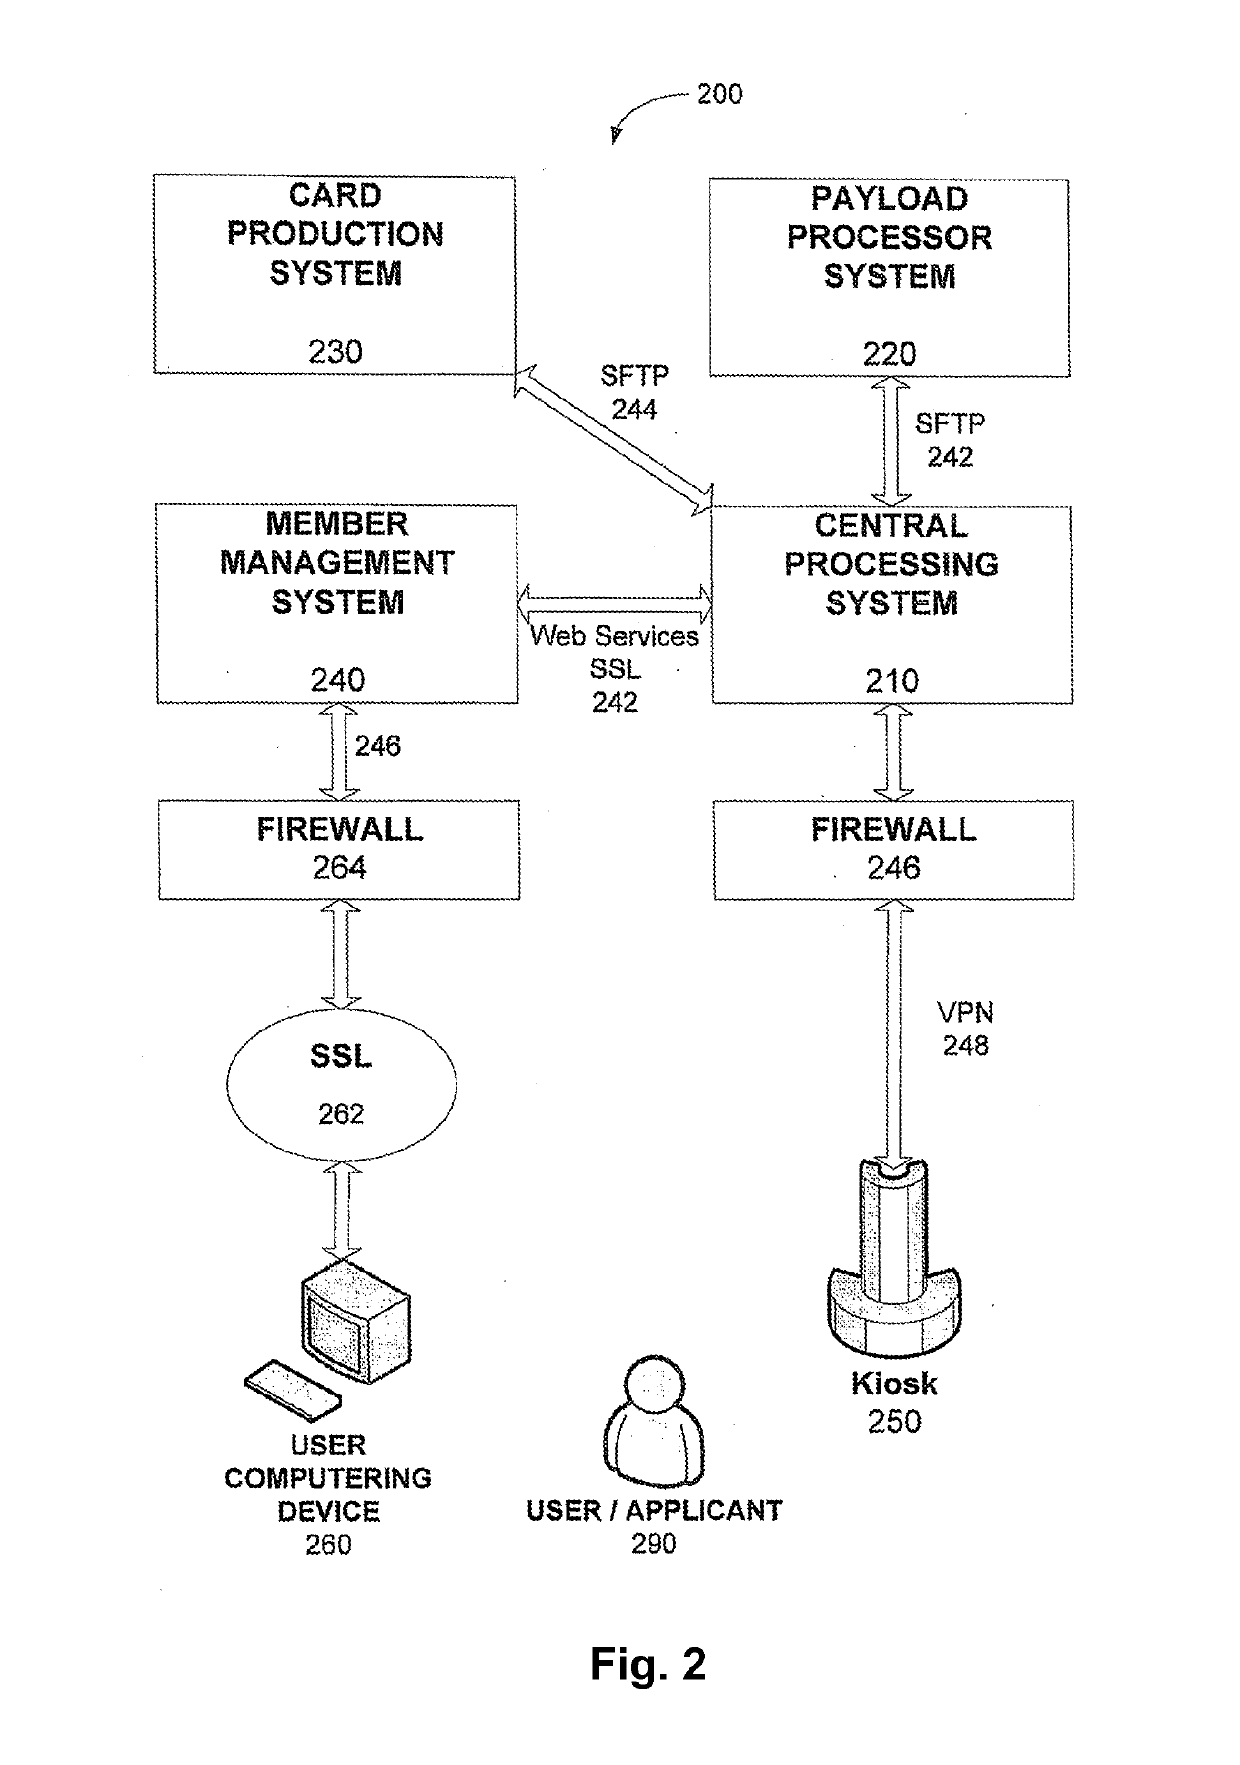 System and method for a financial transaction system having a secure biometric verification system